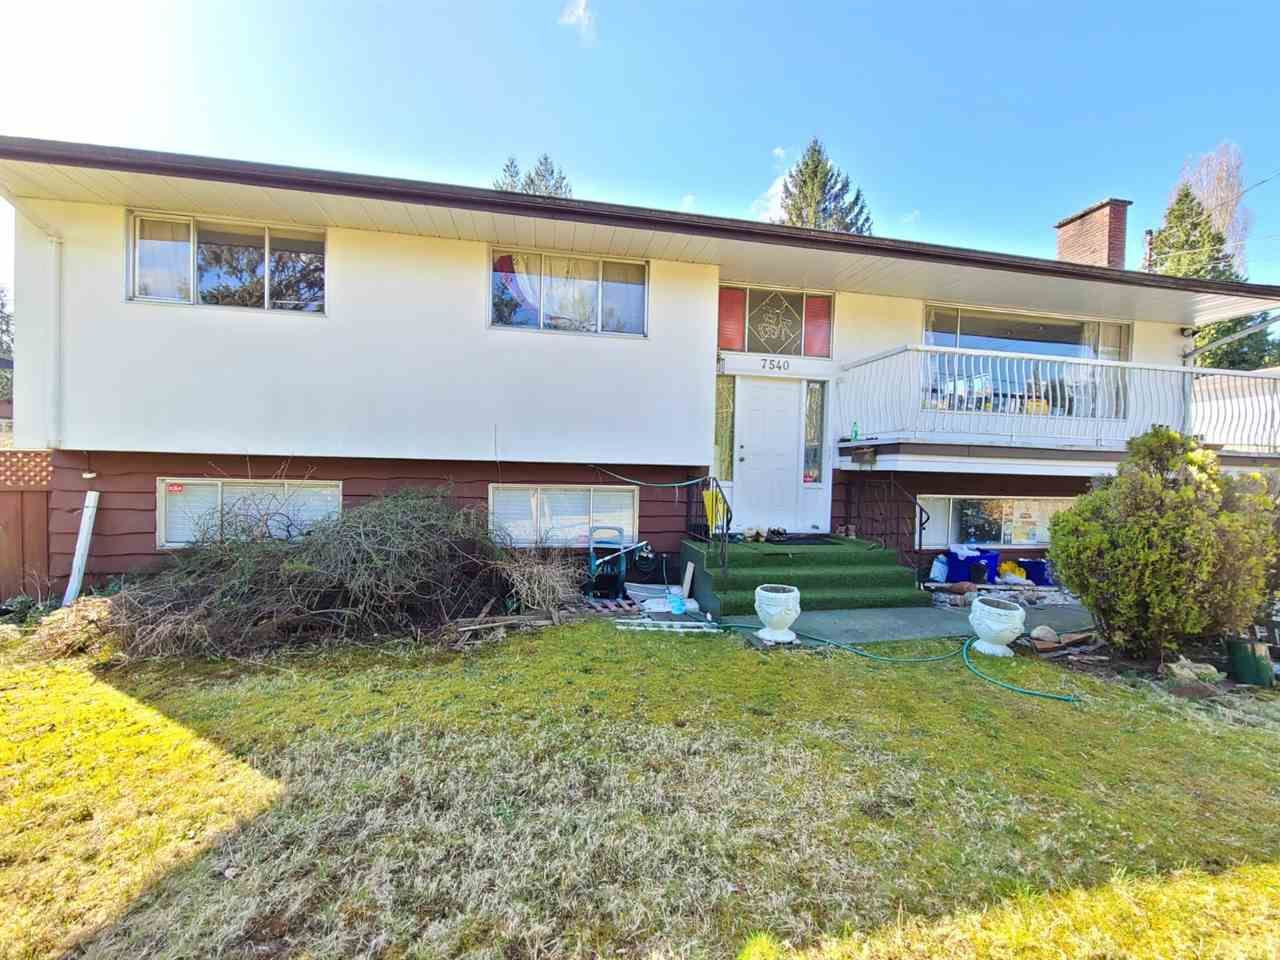 Main Photo: 7540 COLLEEN Street in Burnaby: Government Road House for sale (Burnaby North)  : MLS®# R2561433